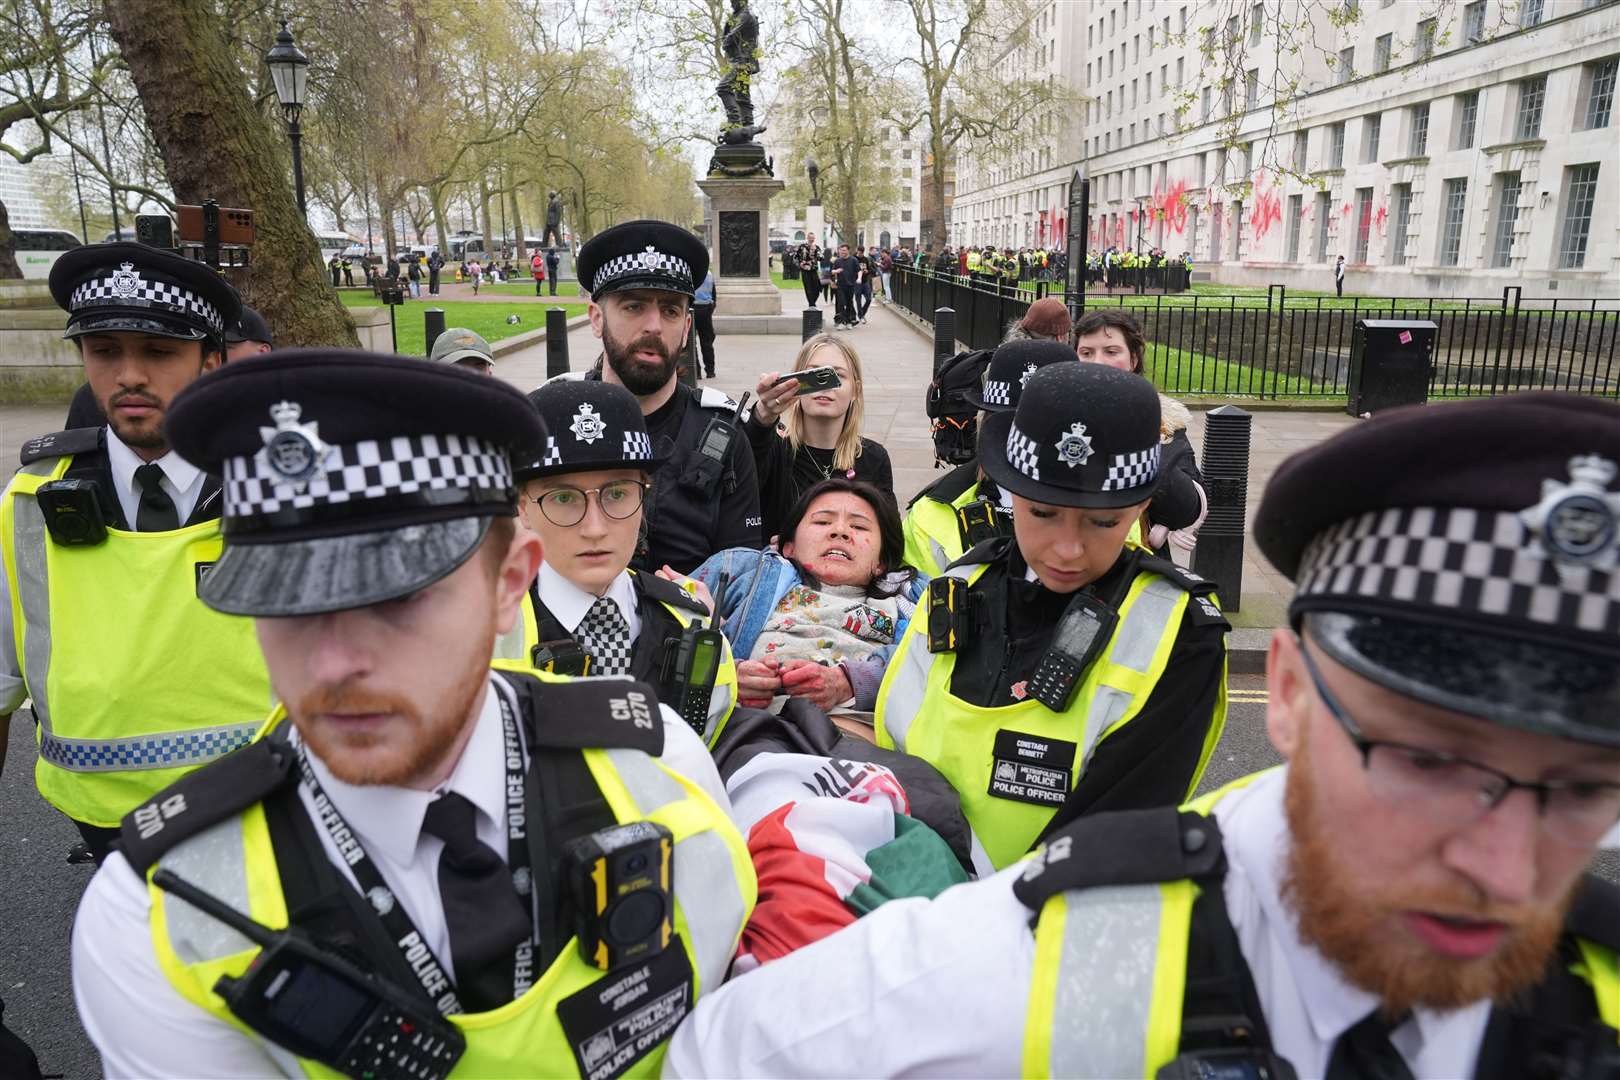 An alleged protester is carried off by police (Lucy North/PA)